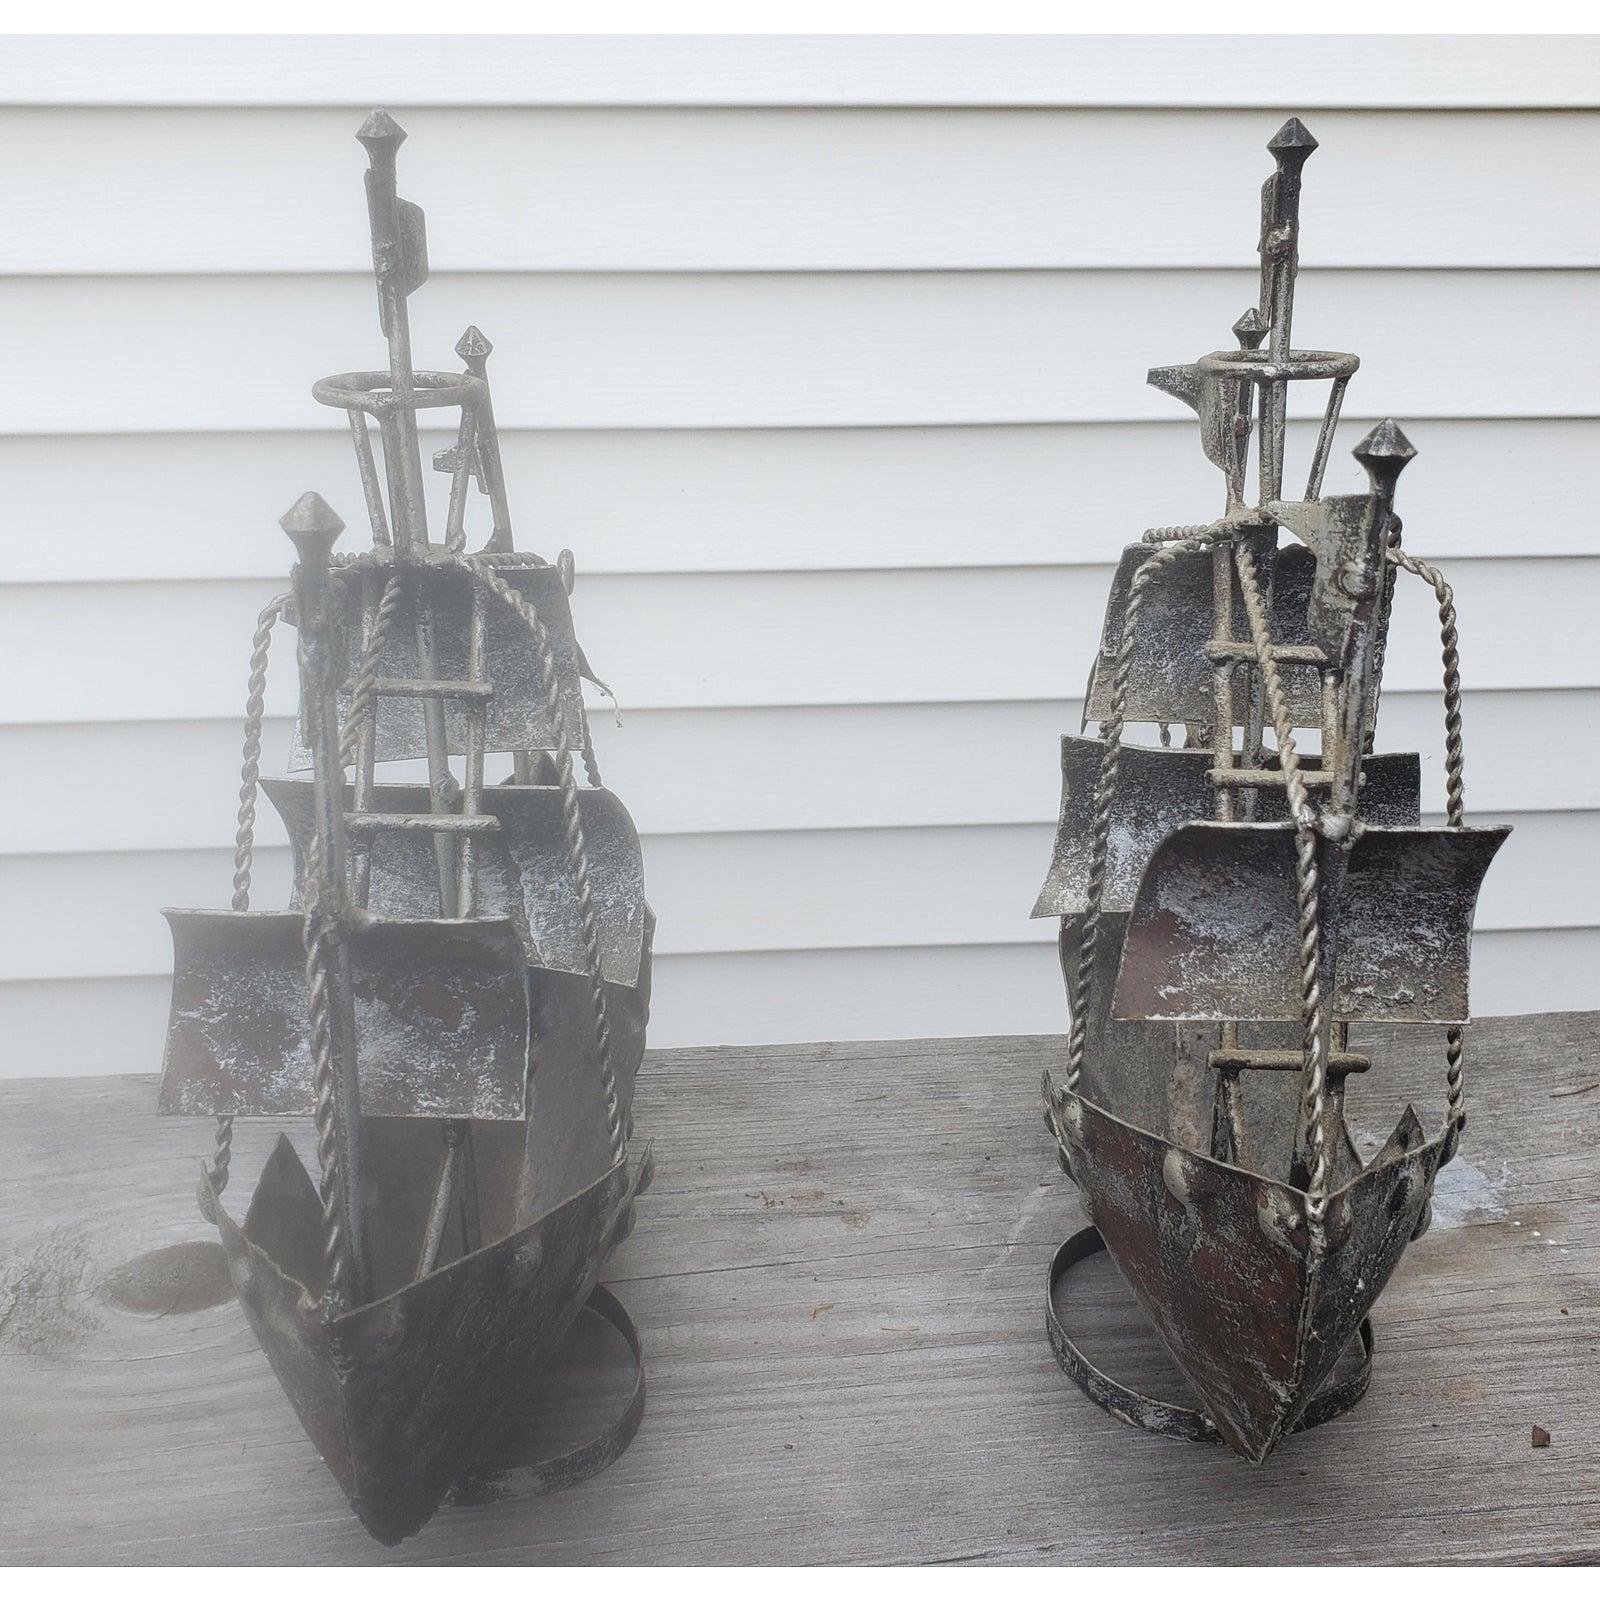 Pair of decorative hand forged iron ships. Good condition. Vintage items form the 1960s.
Measures 12